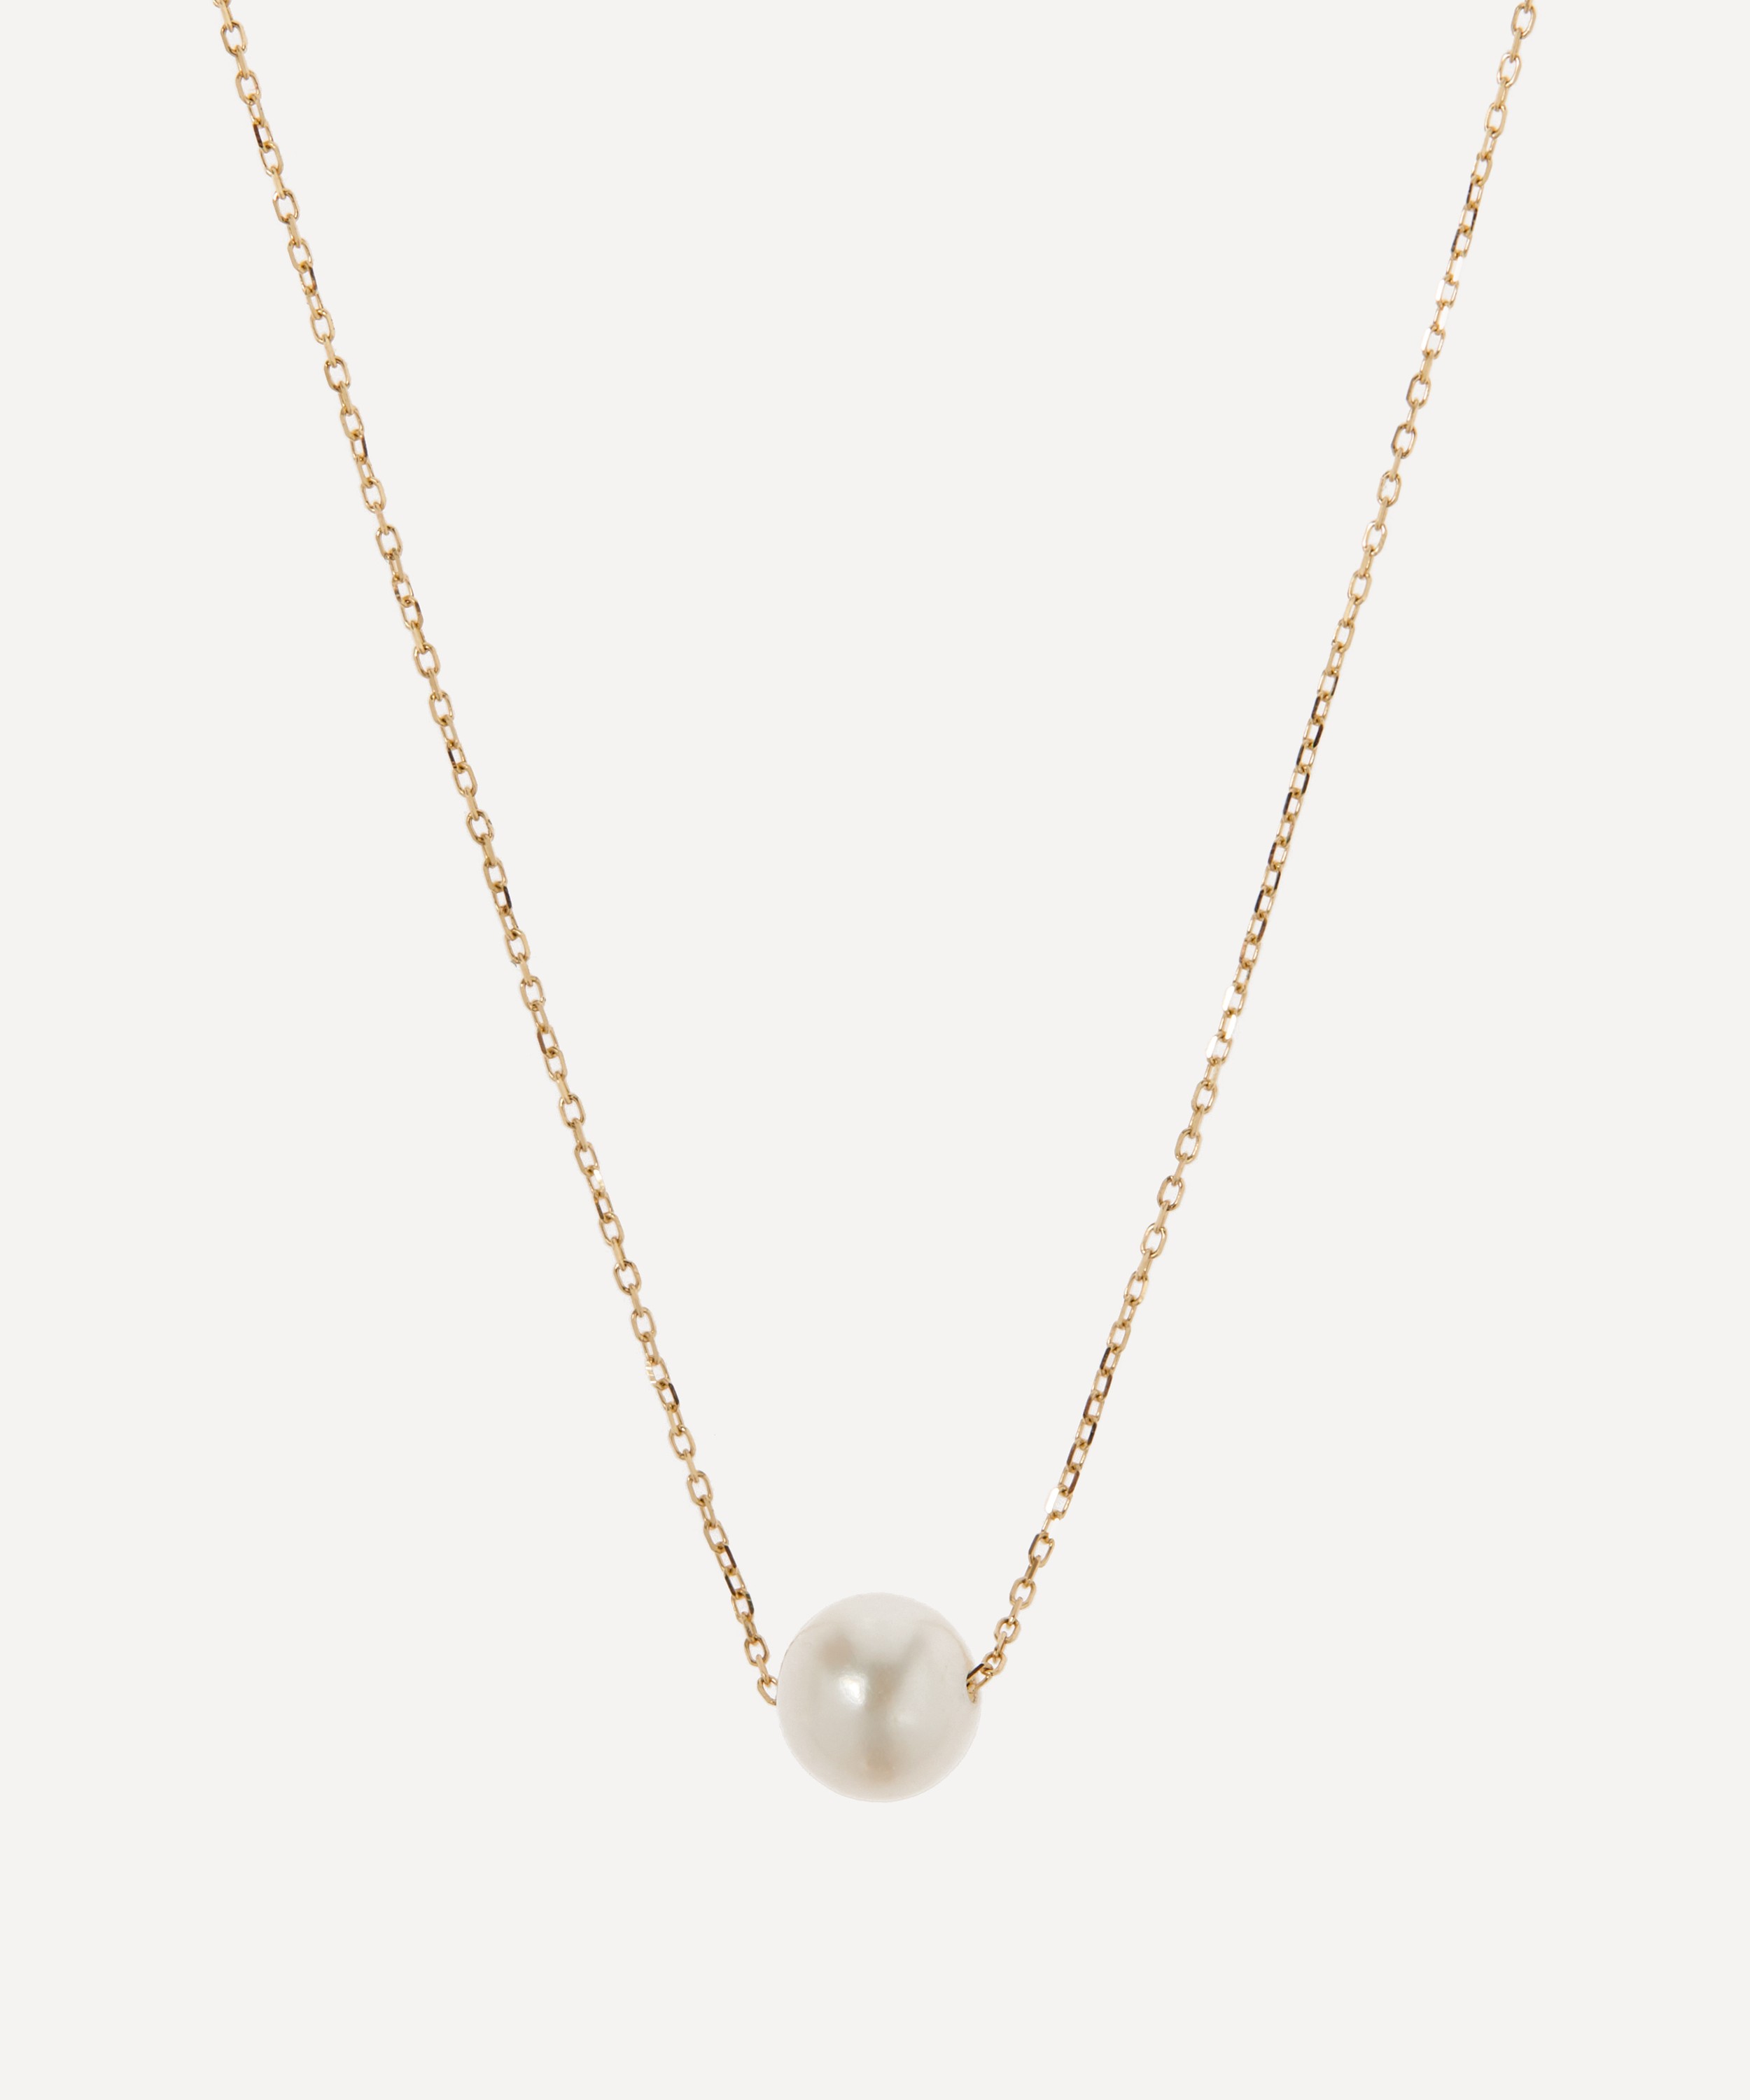 Mateo - 14ct Gold Suspended Pearl Necklace